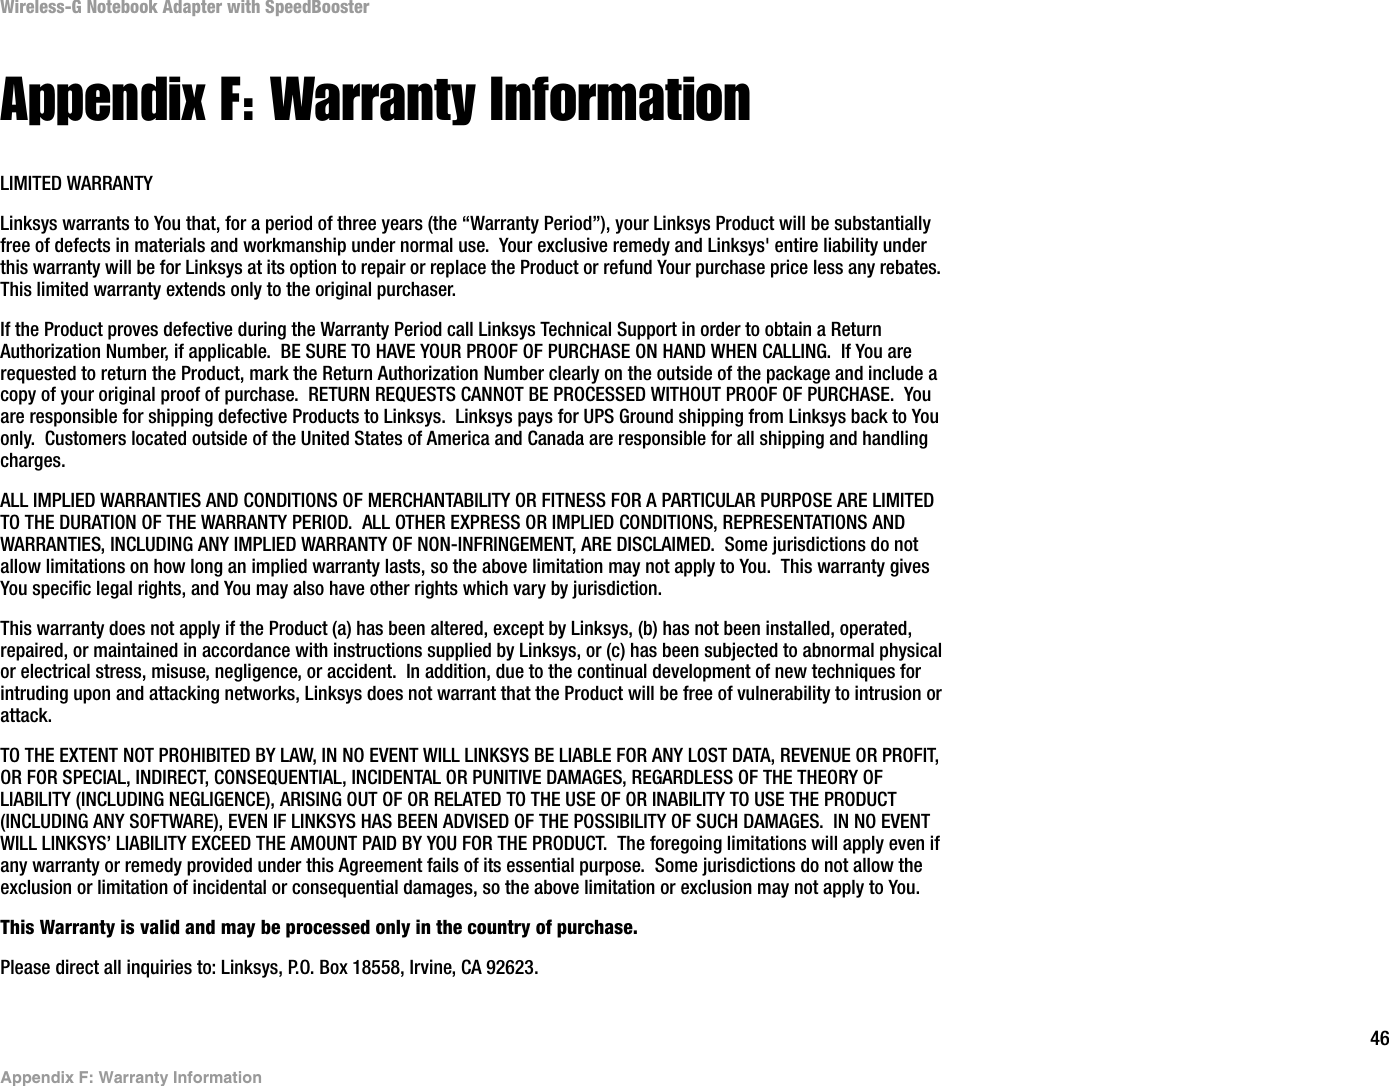 46Appendix F: Warranty InformationWireless-G Notebook Adapter with SpeedBoosterAppendix F: Warranty InformationLIMITED WARRANTYLinksys warrants to You that, for a period of three years (the “Warranty Period”), your Linksys Product will be substantially free of defects in materials and workmanship under normal use.  Your exclusive remedy and Linksys&apos; entire liability under this warranty will be for Linksys at its option to repair or replace the Product or refund Your purchase price less any rebates.This limited warranty extends only to the original purchaser.  If the Product proves defective during the Warranty Period call Linksys Technical Support in order to obtain a Return Authorization Number, if applicable.  BE SURE TO HAVE YOUR PROOF OF PURCHASE ON HAND WHEN CALLING.  If You are requested to return the Product, mark the Return Authorization Number clearly on the outside of the package and include a copy of your original proof of purchase.  RETURN REQUESTS CANNOT BE PROCESSED WITHOUT PROOF OF PURCHASE.  You are responsible for shipping defective Products to Linksys.  Linksys pays for UPS Ground shipping from Linksys back to You only.  Customers located outside of the United States of America and Canada are responsible for all shipping and handling charges. ALL IMPLIED WARRANTIES AND CONDITIONS OF MERCHANTABILITY OR FITNESS FOR A PARTICULAR PURPOSE ARE LIMITED TO THE DURATION OF THE WARRANTY PERIOD.  ALL OTHER EXPRESS OR IMPLIED CONDITIONS, REPRESENTATIONS AND WARRANTIES, INCLUDING ANY IMPLIED WARRANTY OF NON-INFRINGEMENT, ARE DISCLAIMED.  Some jurisdictions do not allow limitations on how long an implied warranty lasts, so the above limitation may not apply to You.  This warranty gives You specific legal rights, and You may also have other rights which vary by jurisdiction.This warranty does not apply if the Product (a) has been altered, except by Linksys, (b) has not been installed, operated, repaired, or maintained in accordance with instructions supplied by Linksys, or (c) has been subjected to abnormal physical or electrical stress, misuse, negligence, or accident.  In addition, due to the continual development of new techniques for intruding upon and attacking networks, Linksys does not warrant that the Product will be free of vulnerability to intrusion or attack.TO THE EXTENT NOT PROHIBITED BY LAW, IN NO EVENT WILL LINKSYS BE LIABLE FOR ANY LOST DATA, REVENUE OR PROFIT, OR FOR SPECIAL, INDIRECT, CONSEQUENTIAL, INCIDENTAL OR PUNITIVE DAMAGES, REGARDLESS OF THE THEORY OF LIABILITY (INCLUDING NEGLIGENCE), ARISING OUT OF OR RELATED TO THE USE OF OR INABILITY TO USE THE PRODUCT (INCLUDING ANY SOFTWARE), EVEN IF LINKSYS HAS BEEN ADVISED OF THE POSSIBILITY OF SUCH DAMAGES.  IN NO EVENT WILL LINKSYS’ LIABILITY EXCEED THE AMOUNT PAID BY YOU FOR THE PRODUCT.  The foregoing limitations will apply even if any warranty or remedy provided under this Agreement fails of its essential purpose.  Some jurisdictions do not allow the exclusion or limitation of incidental or consequential damages, so the above limitation or exclusion may not apply to You.This Warranty is valid and may be processed only in the country of purchase.Please direct all inquiries to: Linksys, P.O. Box 18558, Irvine, CA 92623.